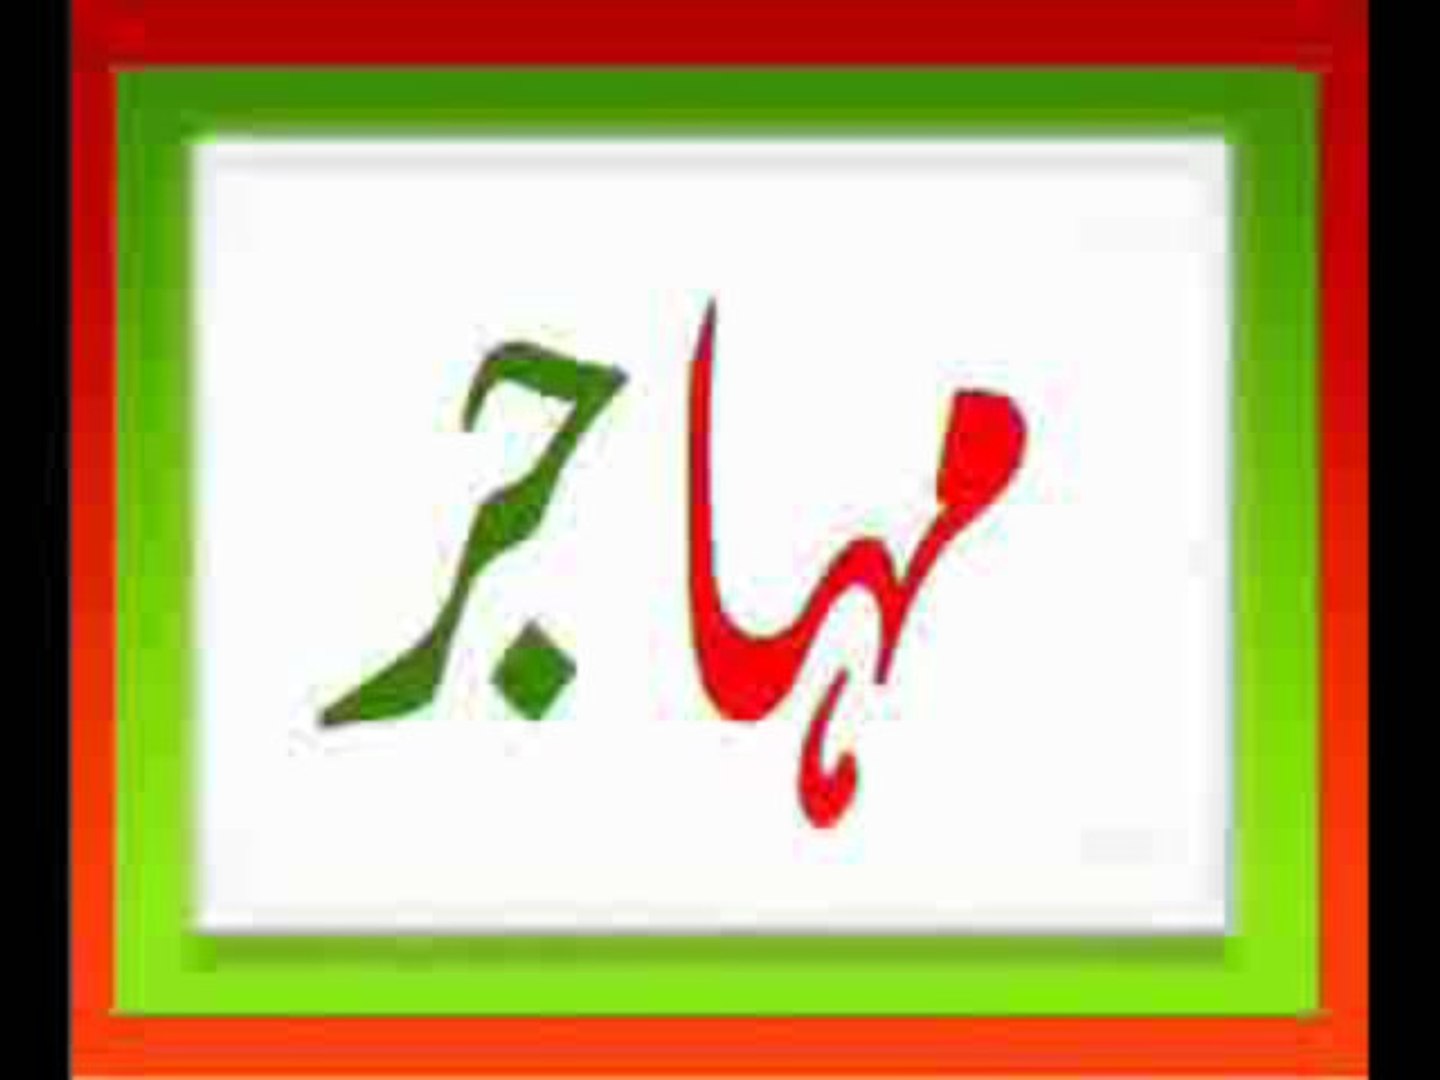 mqm new songs mp3 free download